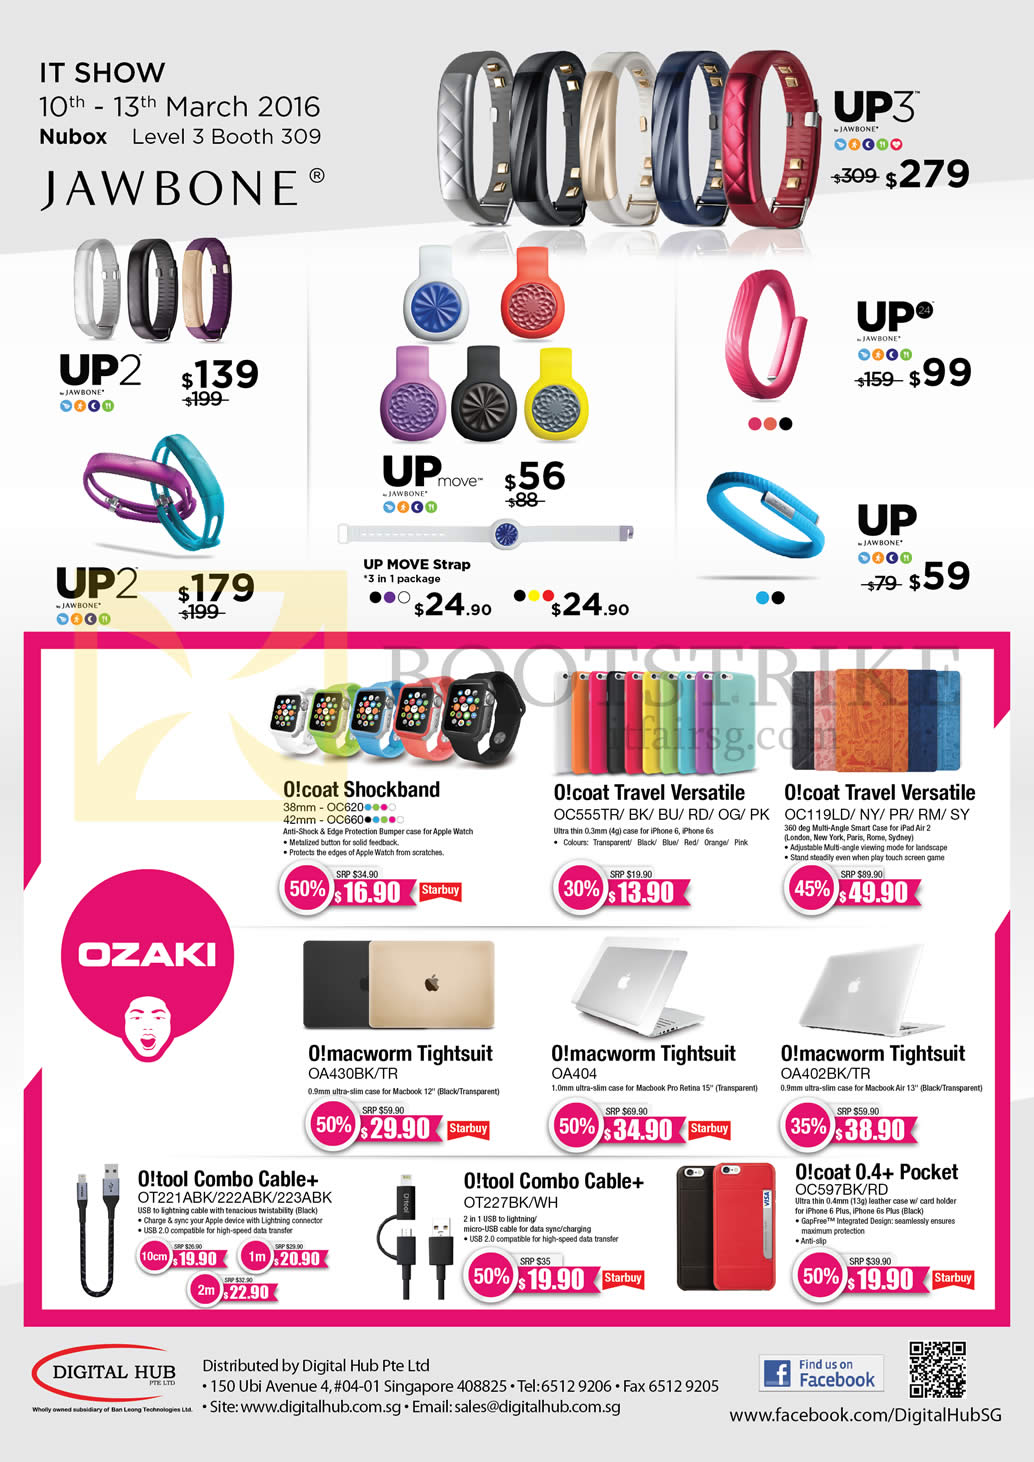 IT SHOW 2016 price list image brochure of Nubox Jawbone Fitness Trackers, Cables, UP, UP2, UP3, O Coat Shockband, Travel Versatile, Macworm Tightsuit, Combo Cable Plus